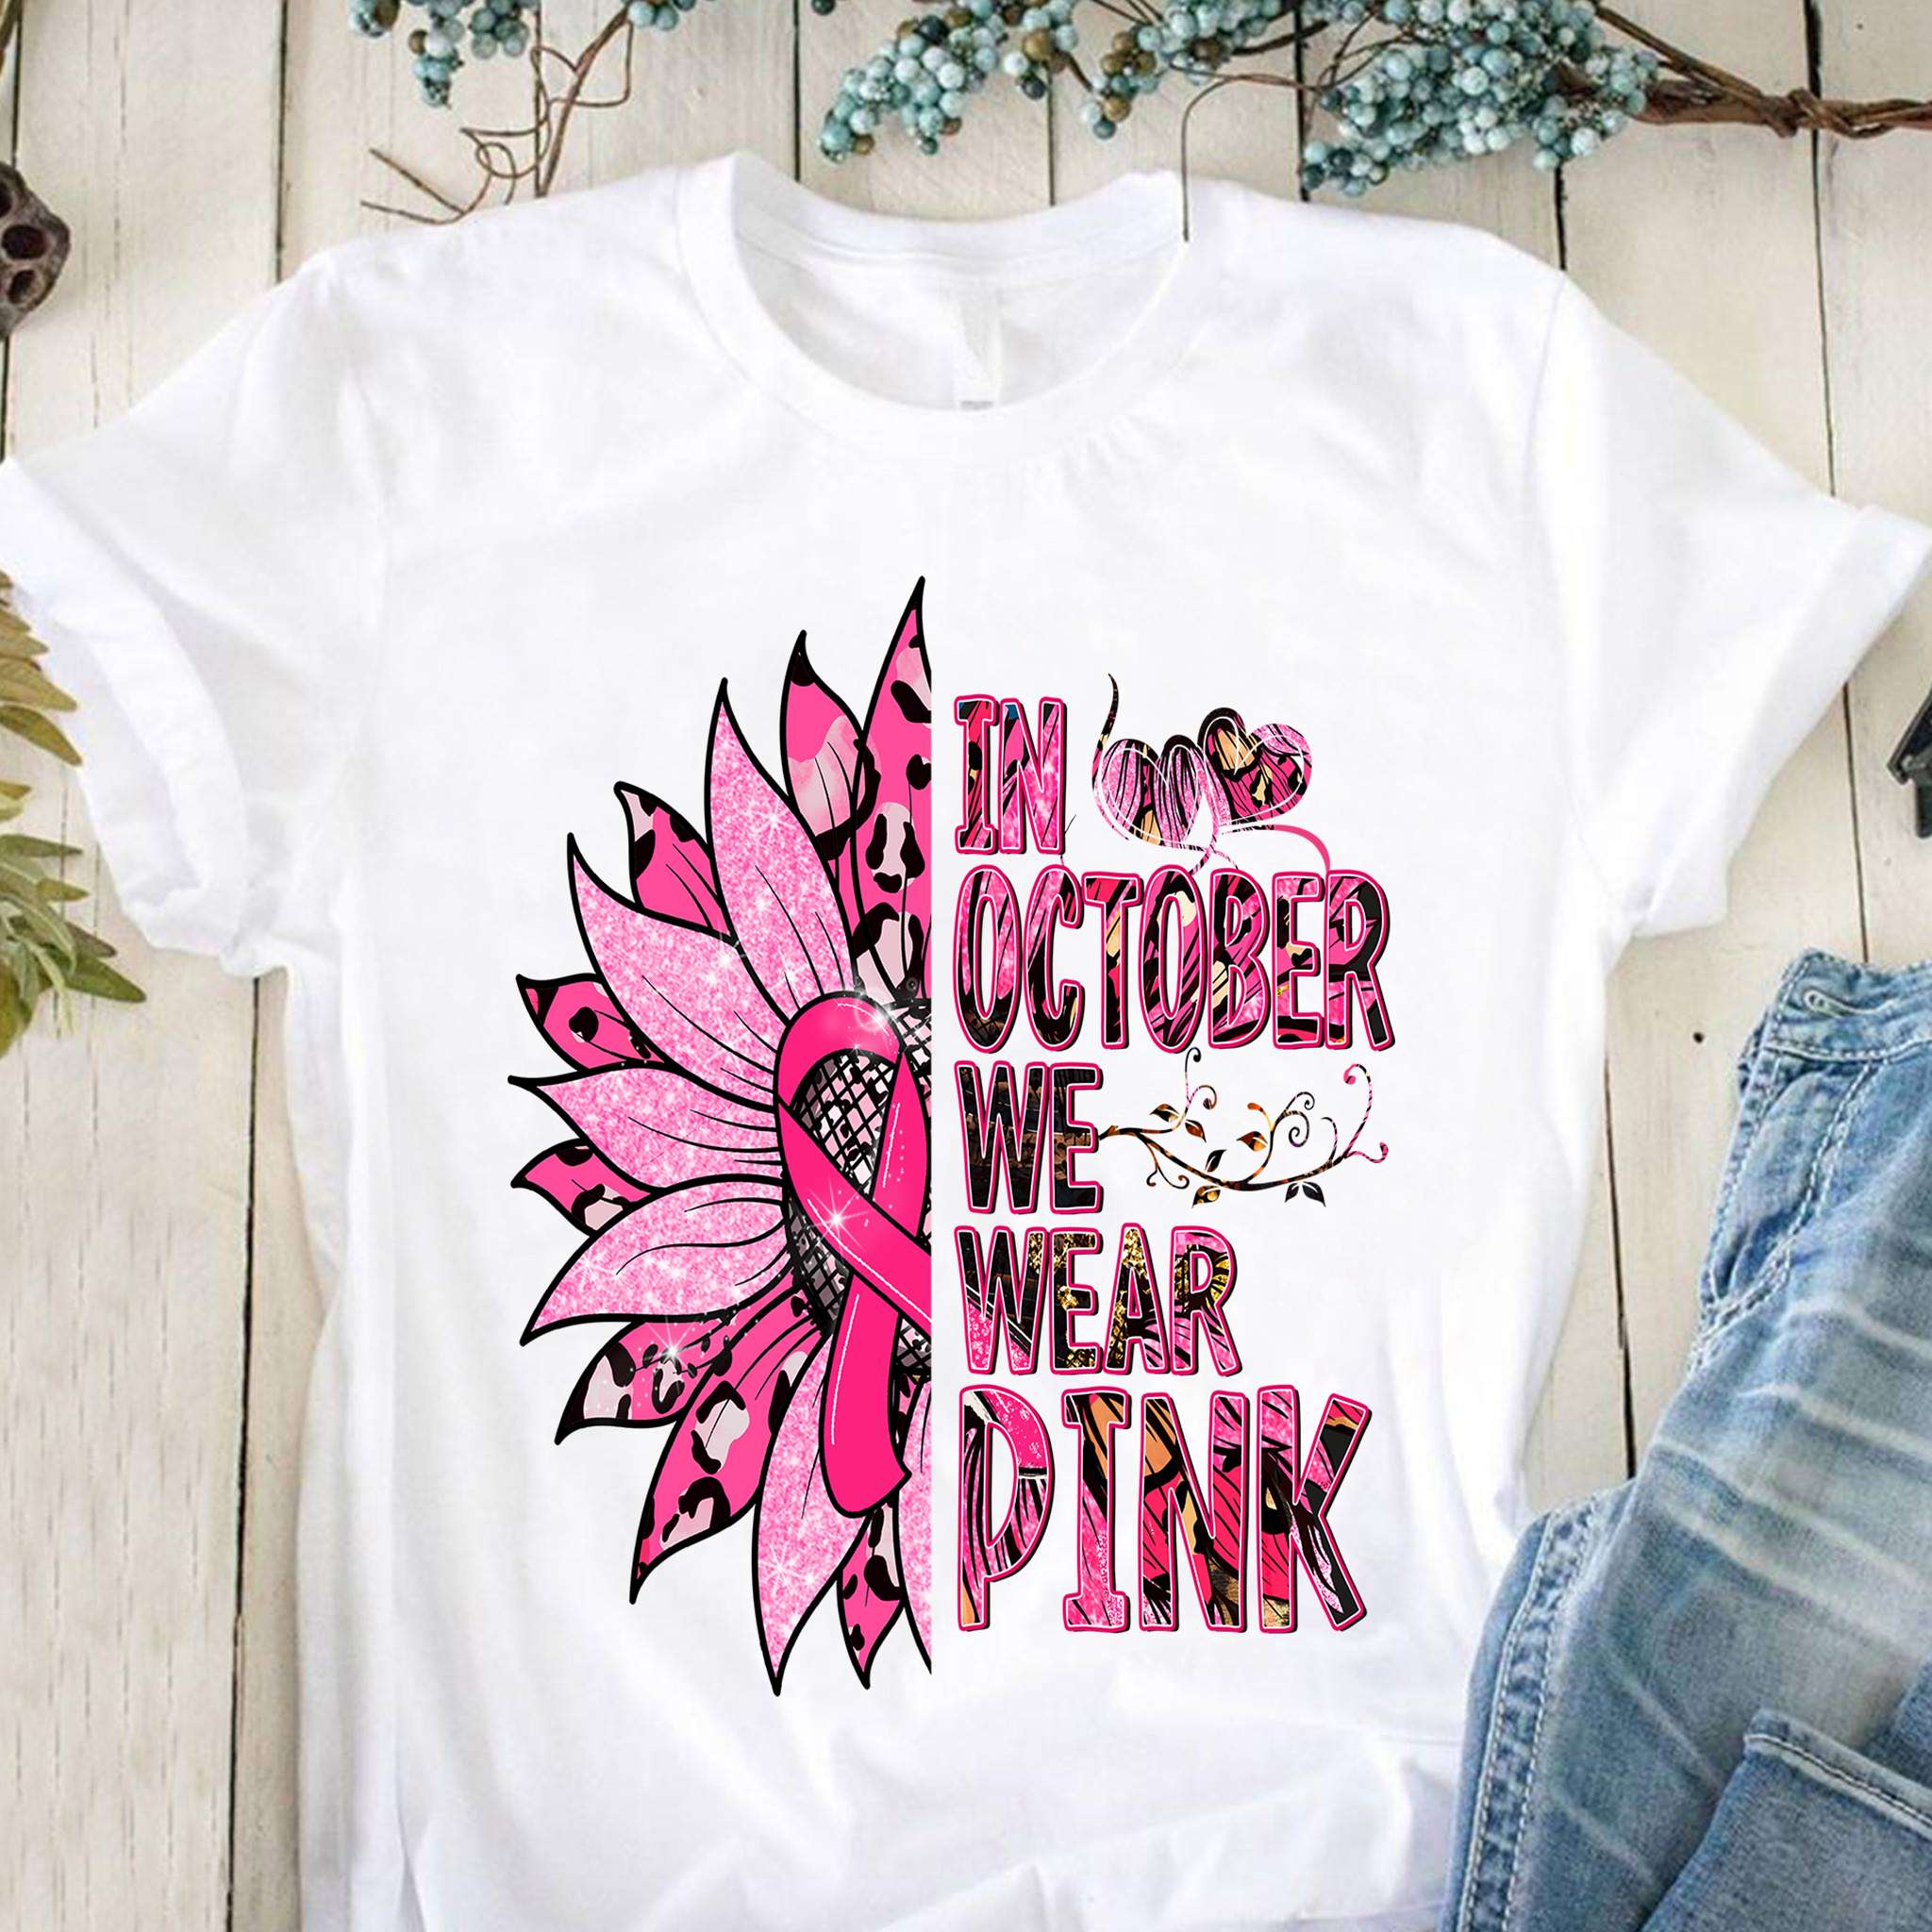 In october we wear pink - Cancer awareness month, october awareness month